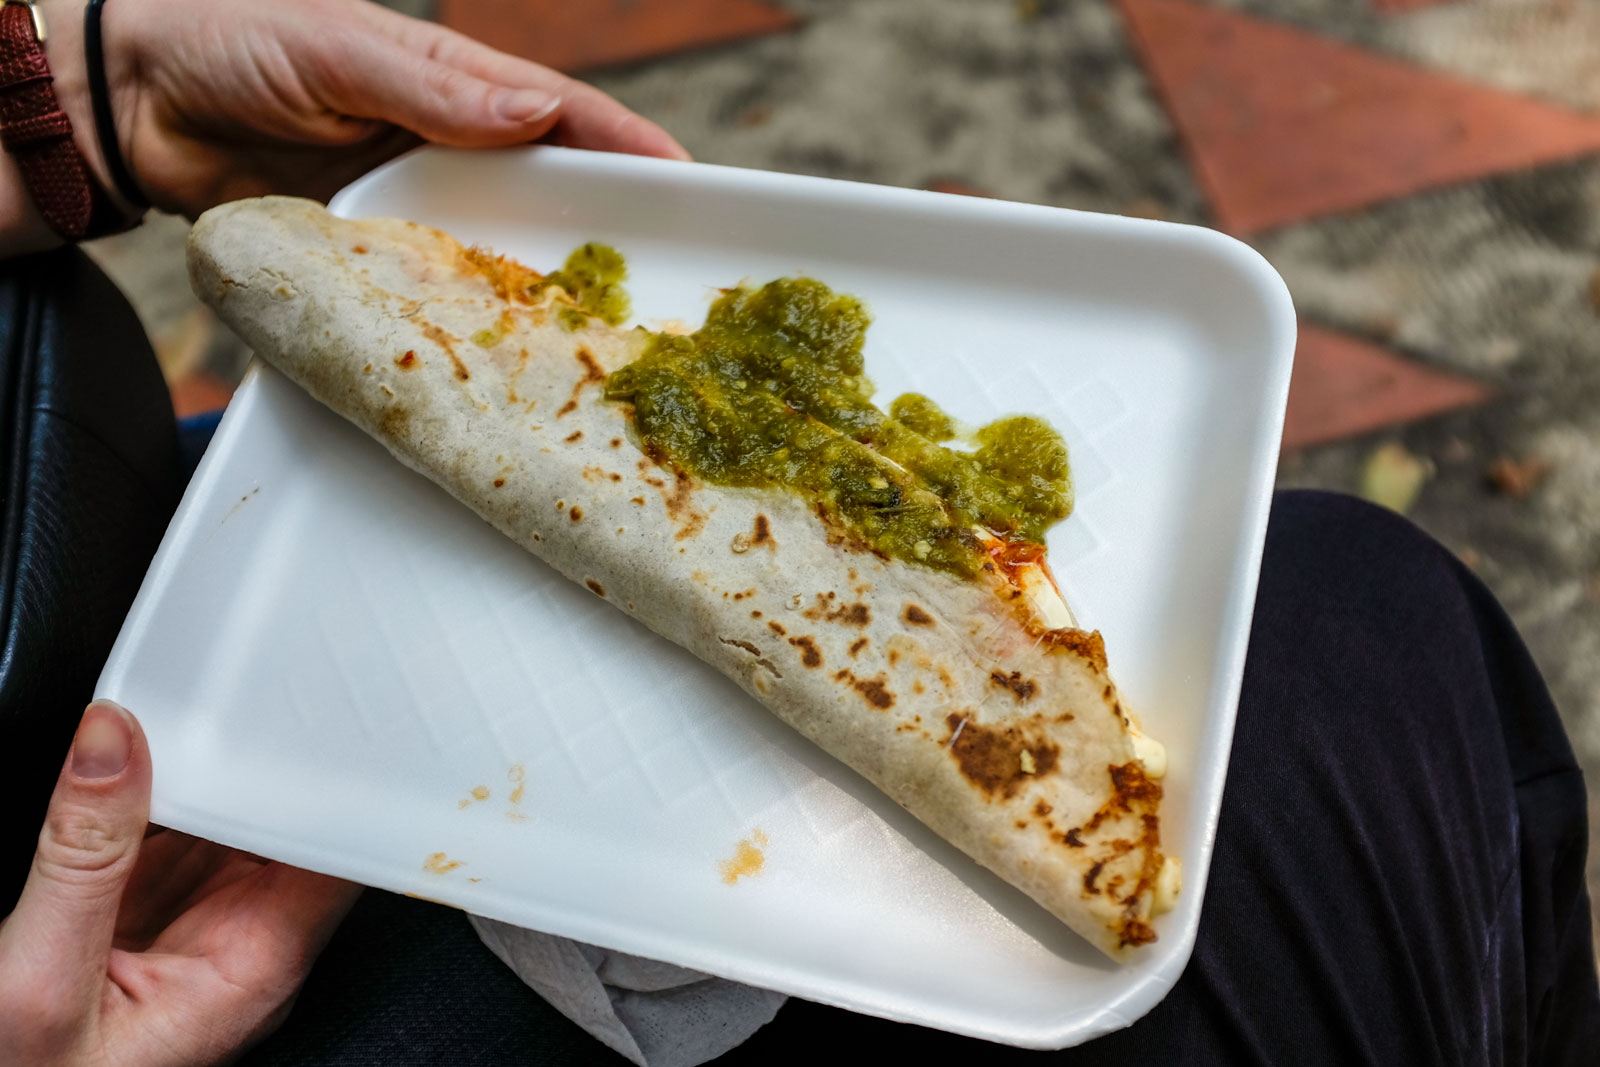 A Quesadilla from a street vendor in Mexico City